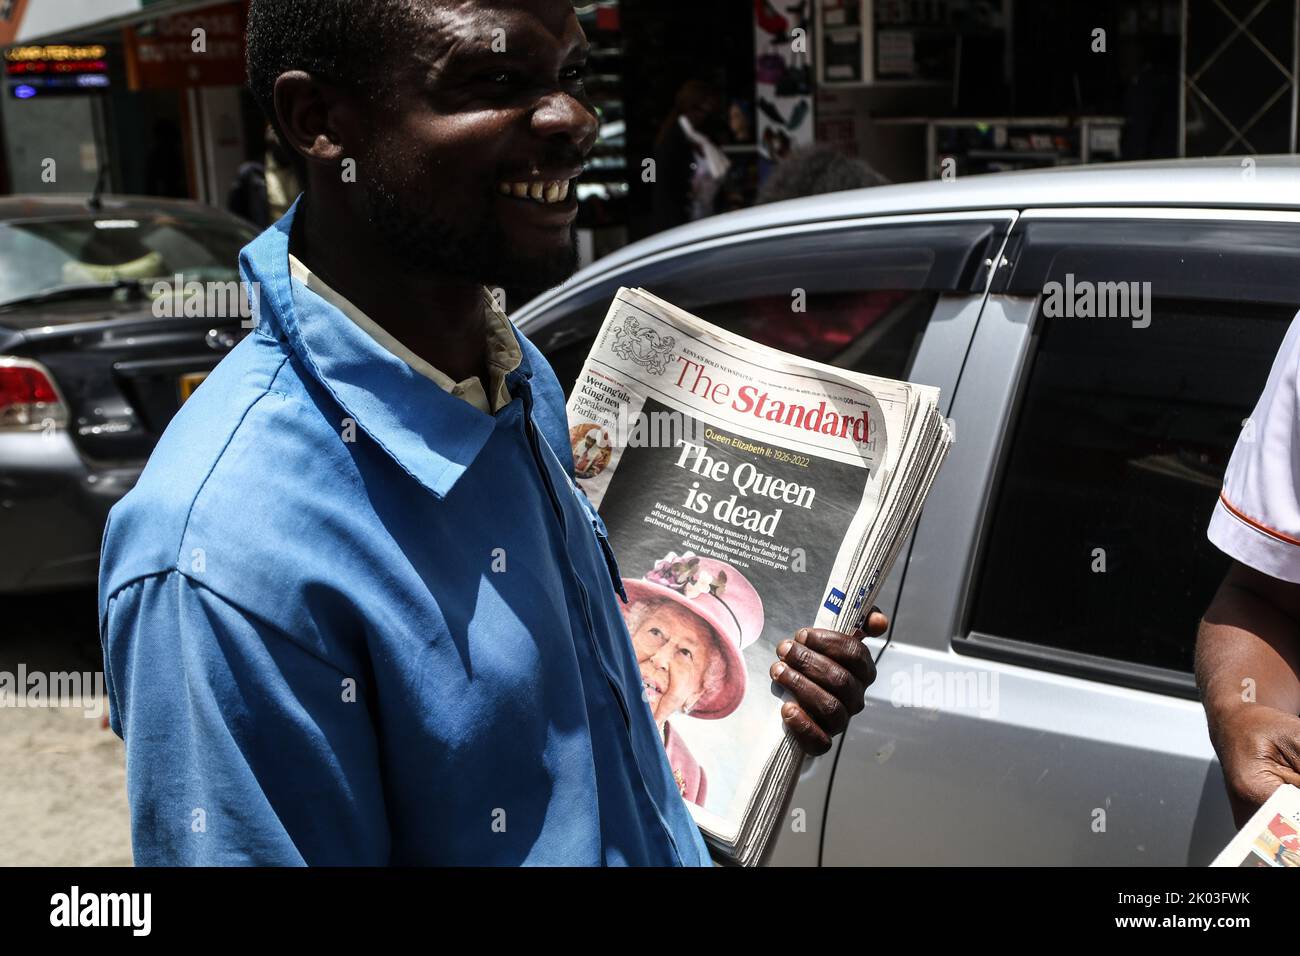 Nakuru, Kenya. 09th Sep, 2022. A newspaper vendor is seen smiling while holding newspapers with a front page image of Queen Elizabeth II. Queen Elizabeth II died on Thursday, September 8, 2022, at the age of 96. (Photo by James Wakibia/SOPA Images/Sipa USA) Credit: Sipa USA/Alamy Live News Stock Photo